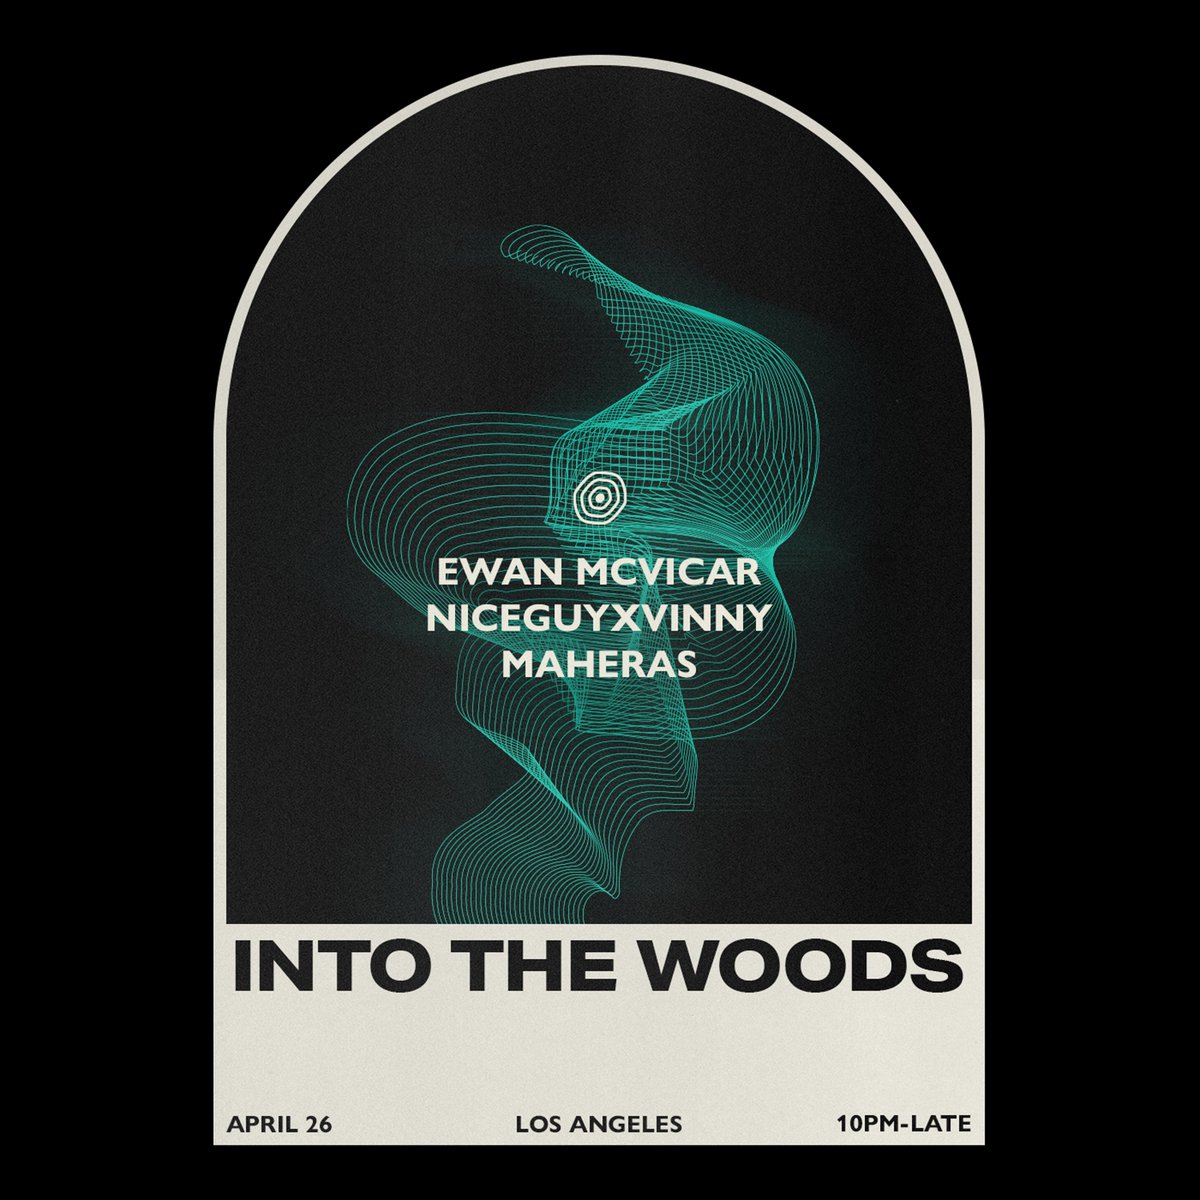 Into The Woods this Friday, April 26... Music by: Ewan McVicar ✨ NiceGuyxVinny ✨ Maheras ✨ Grab your ticket here -> ra.co/events/1861468… @ewanmcvicar_ @NiceGuyxVinny @Soulection @JimmyMaheras